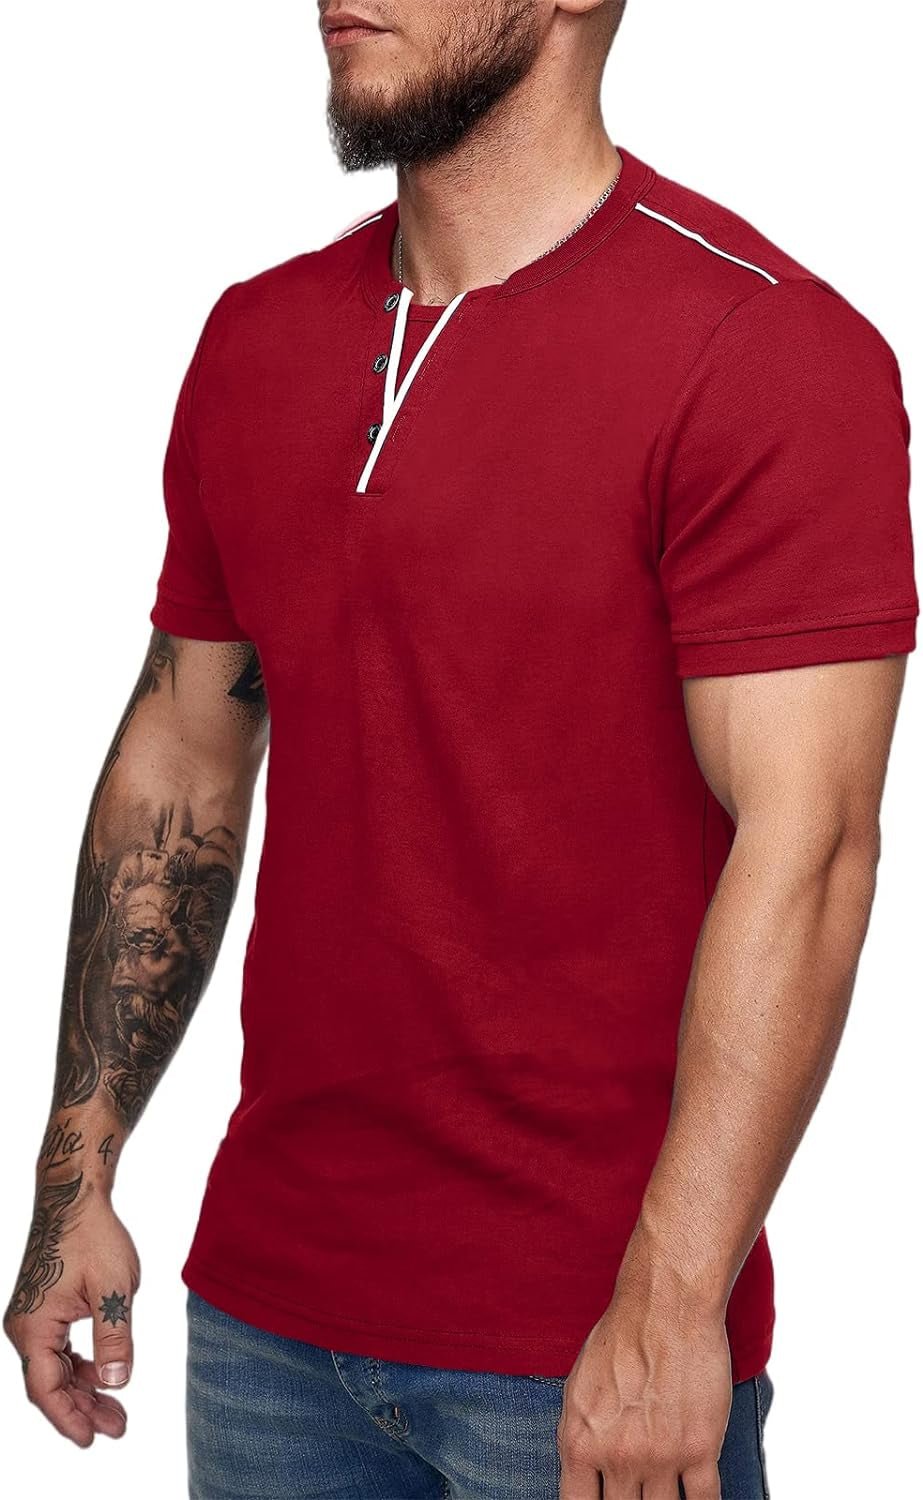 "Summer Style Upgrade: Men'S Slim Fit Henley T-Shirts for a Casual and Cool Look"